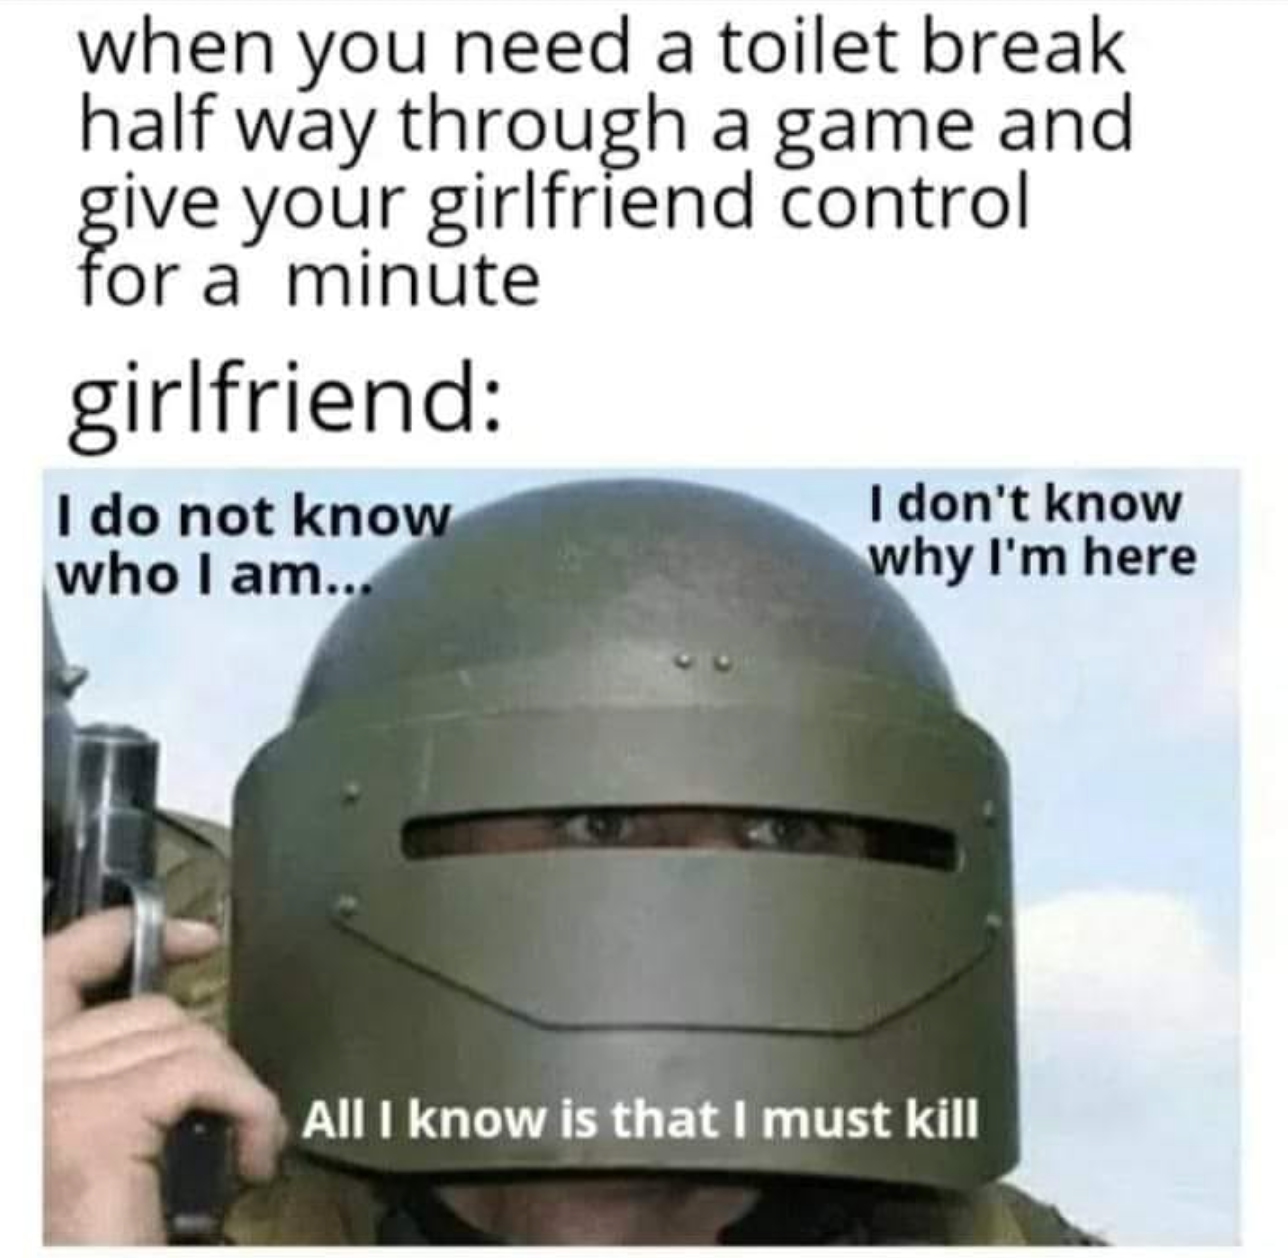 funny gaming memes - my name red meme - when you need a toilet break half way through a game and give your girlfriend control for a minute girlfriend I do not know I don't know who I am... why I'm here All I know is that I must kill